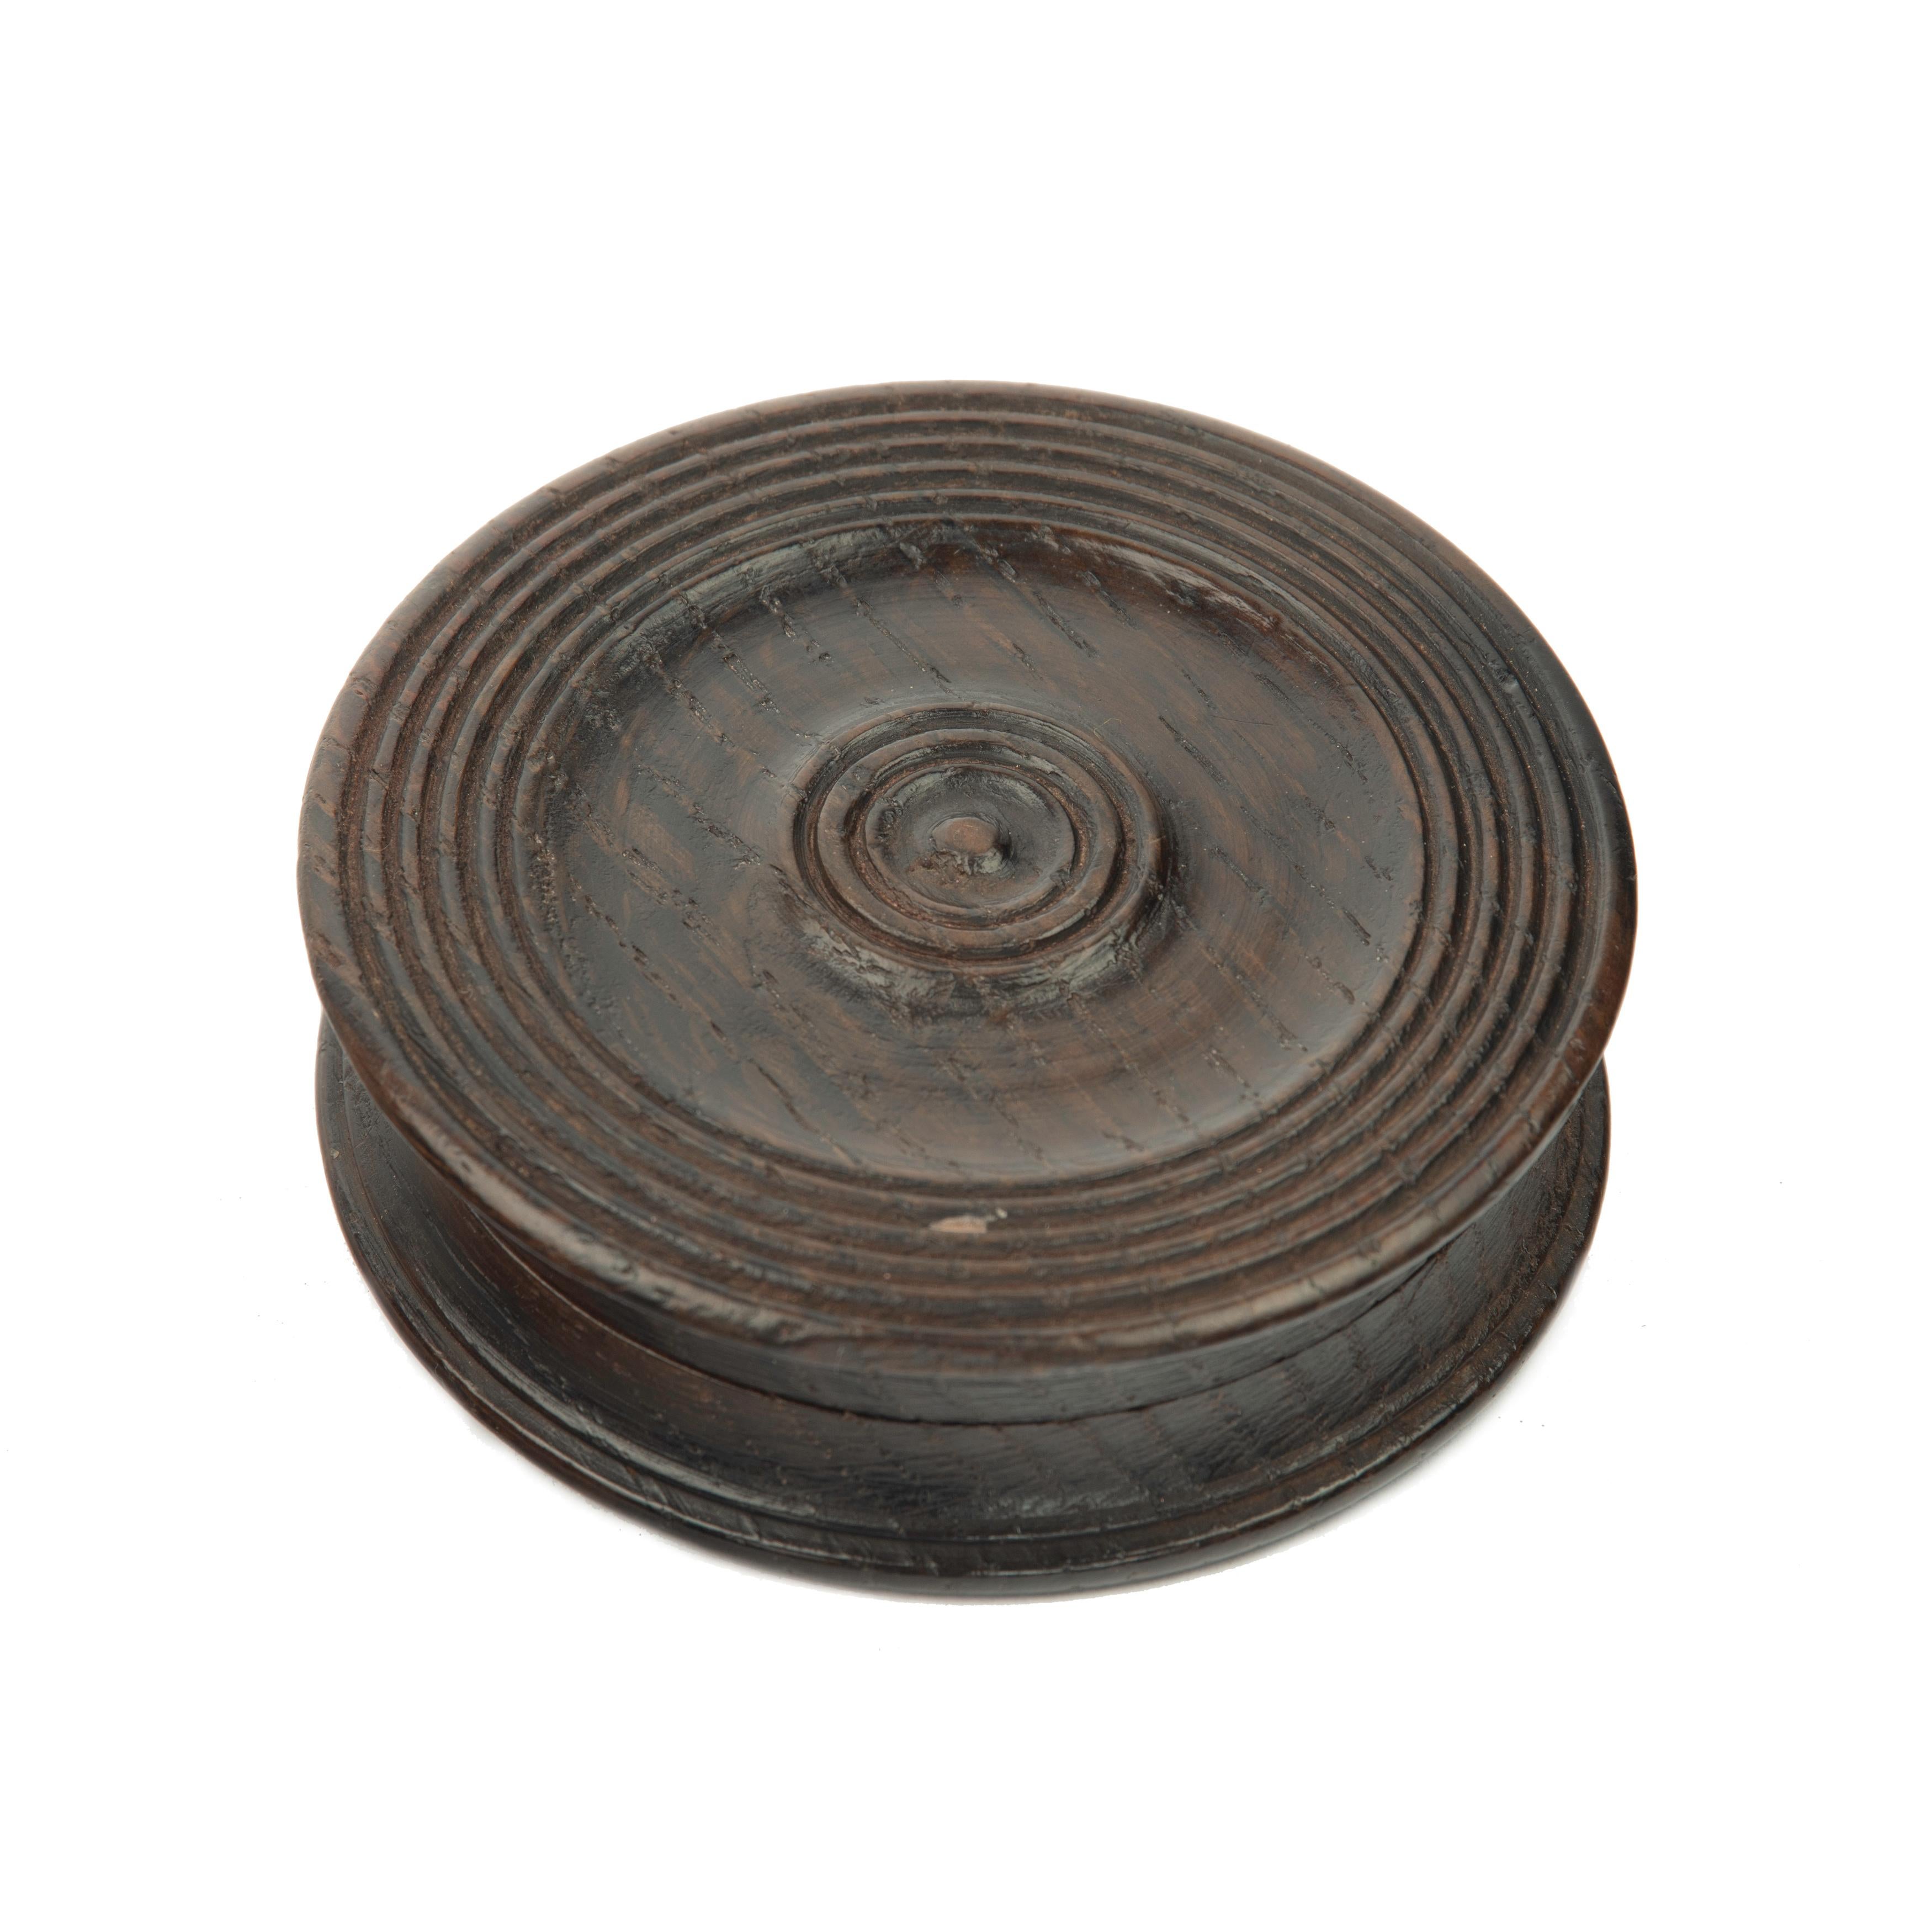 A black oak snuff box made from timber recovered from H.M.S. Boyne, sunk 1795, raised 1833, of circular form with turned lid and base, the lid with printed description of Boyne’s career and sinking.  English, circa 1830. Diameter 3in. (7.5cm)
